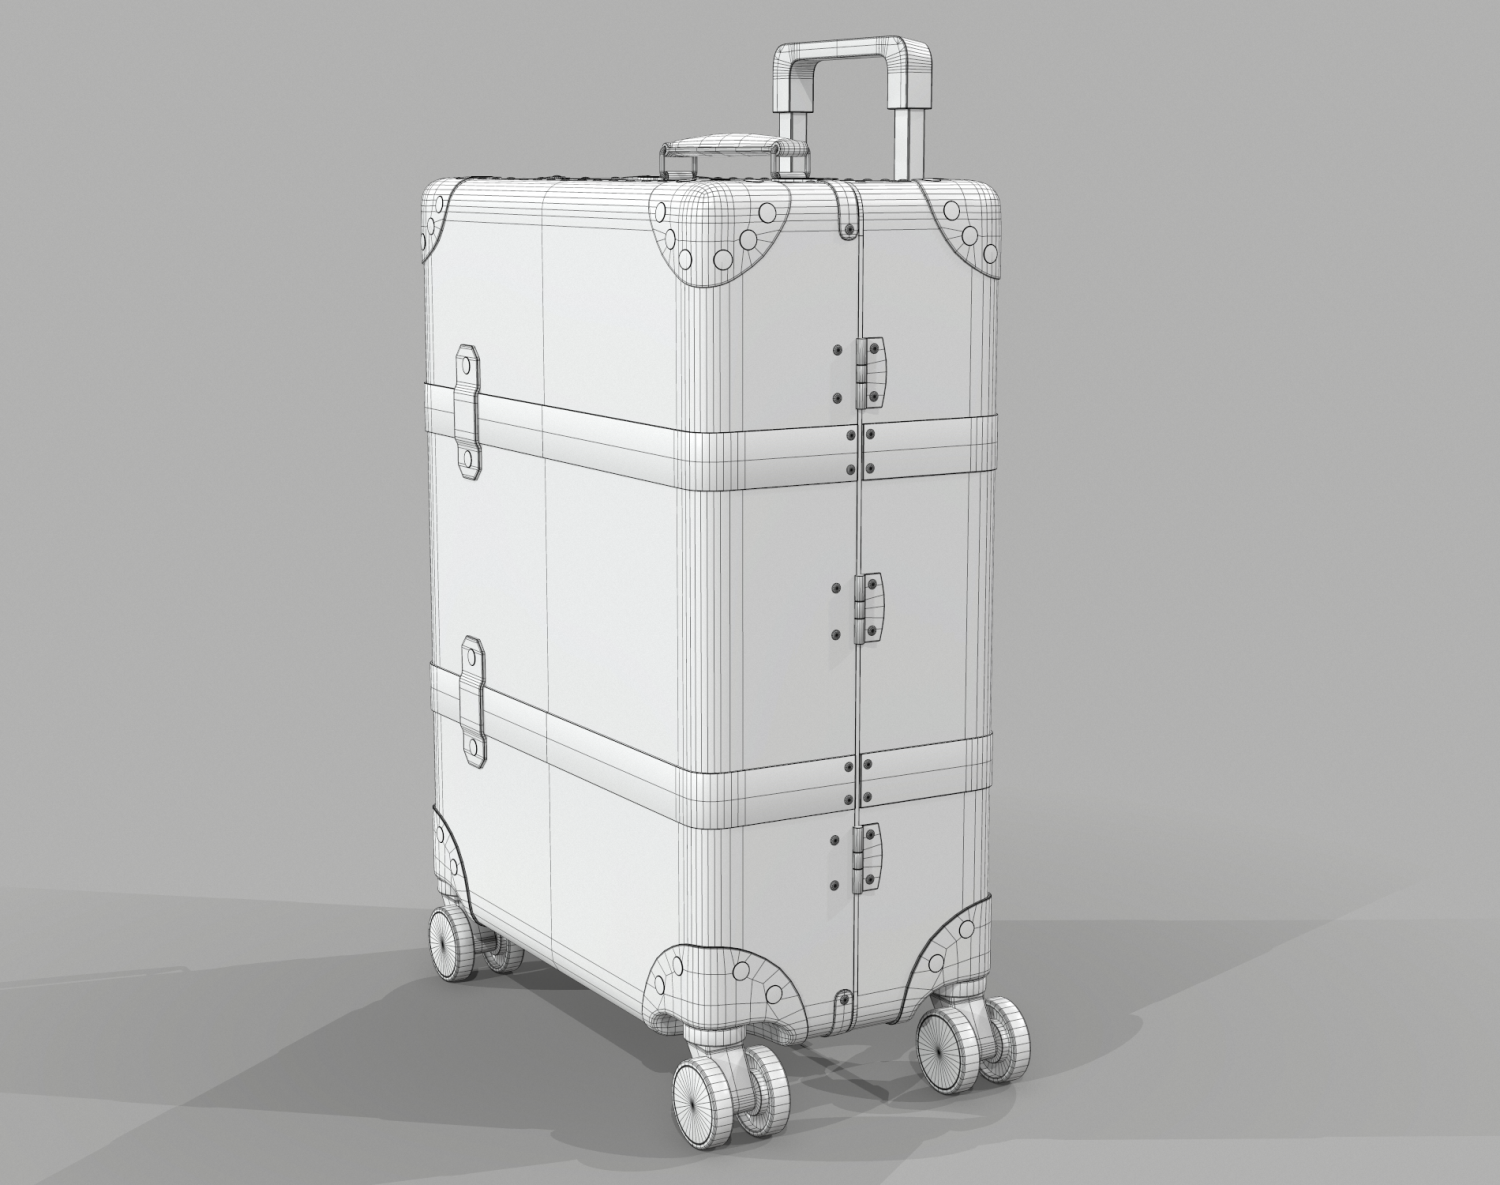 Gucci Globe-Trotter GG canvas luggage suitcase | 3D model